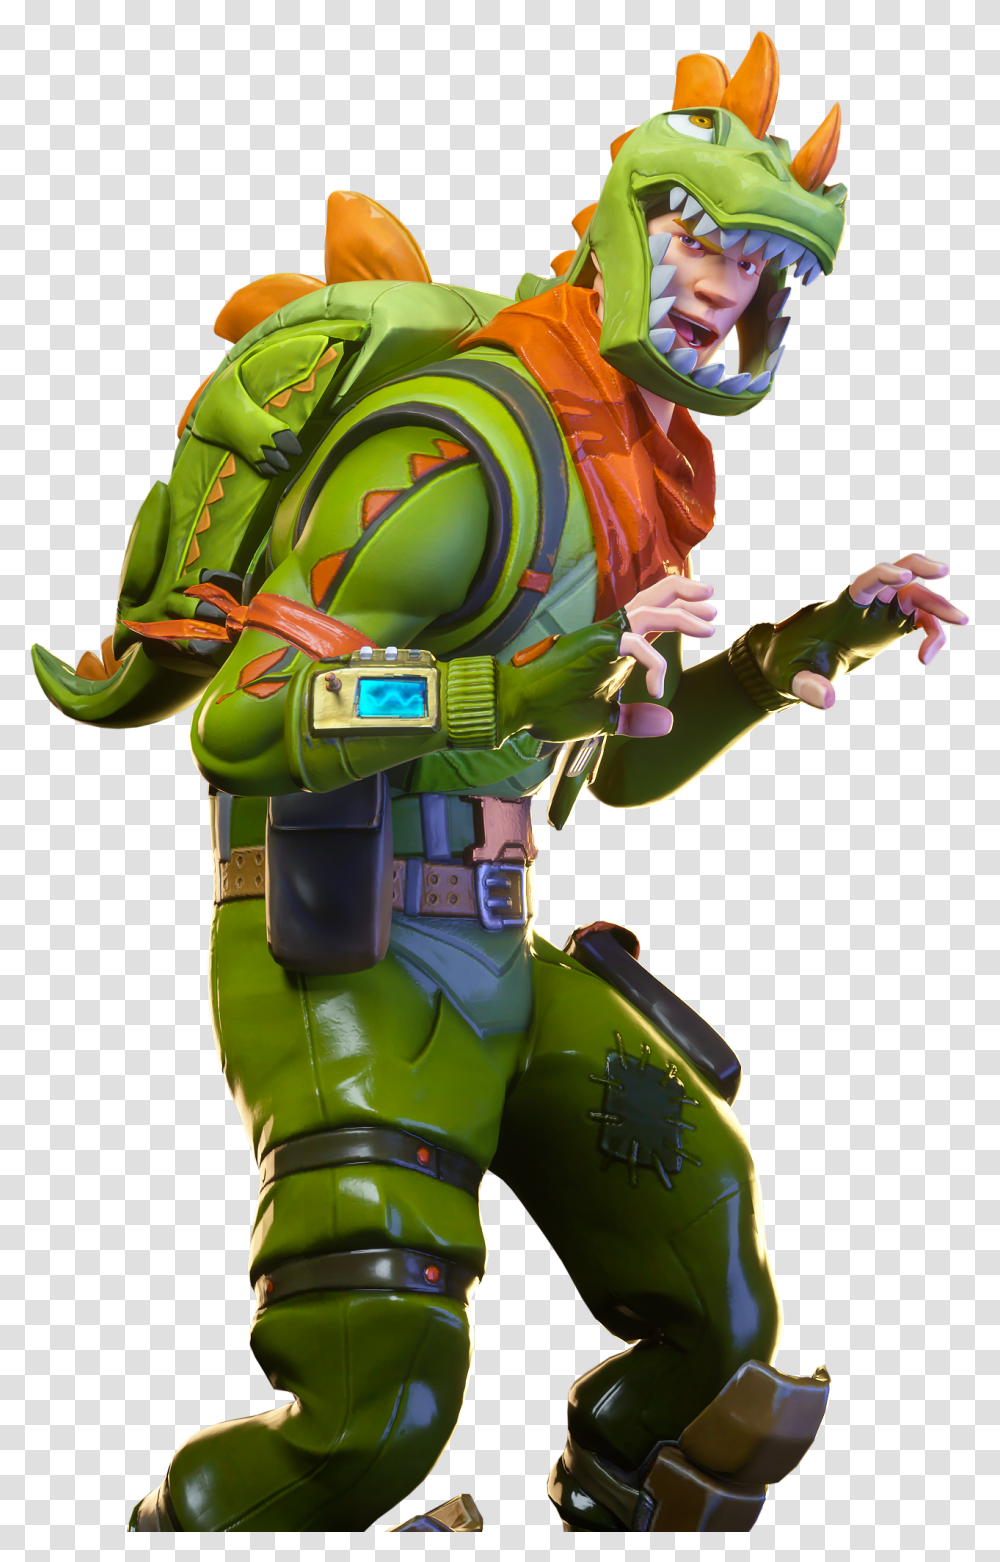 Fortnite Renders Character Fortnite Renders, Toy, Overwatch, Costume, Sweets Transparent Png